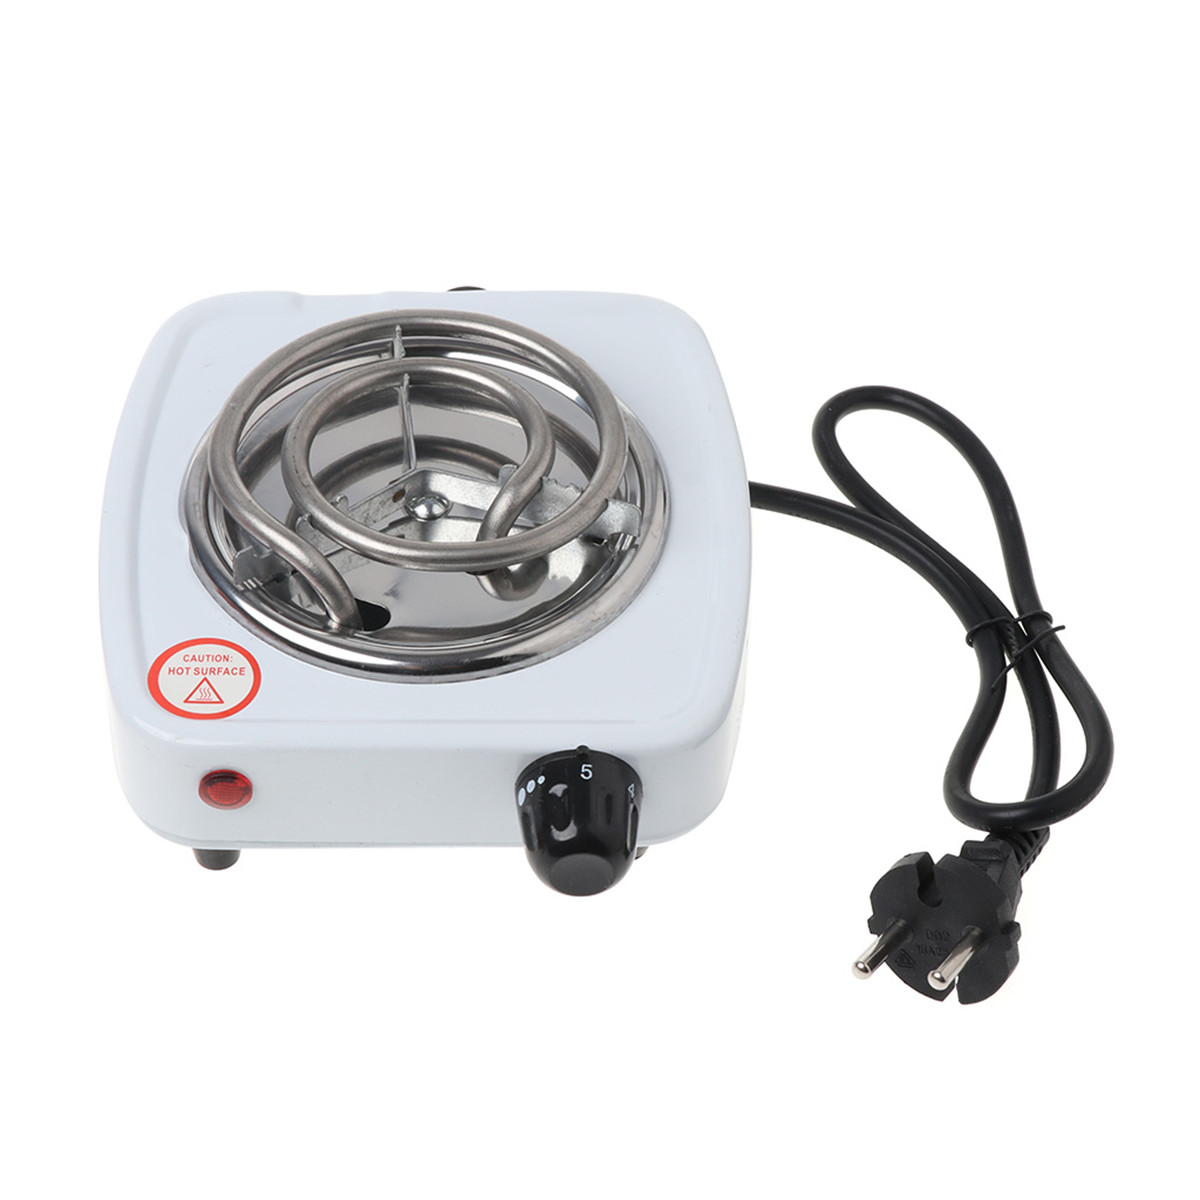 

500W 220V Portable Electric Stove Burner Hot Plate Home Dorm Cook Travel Cooking Stove